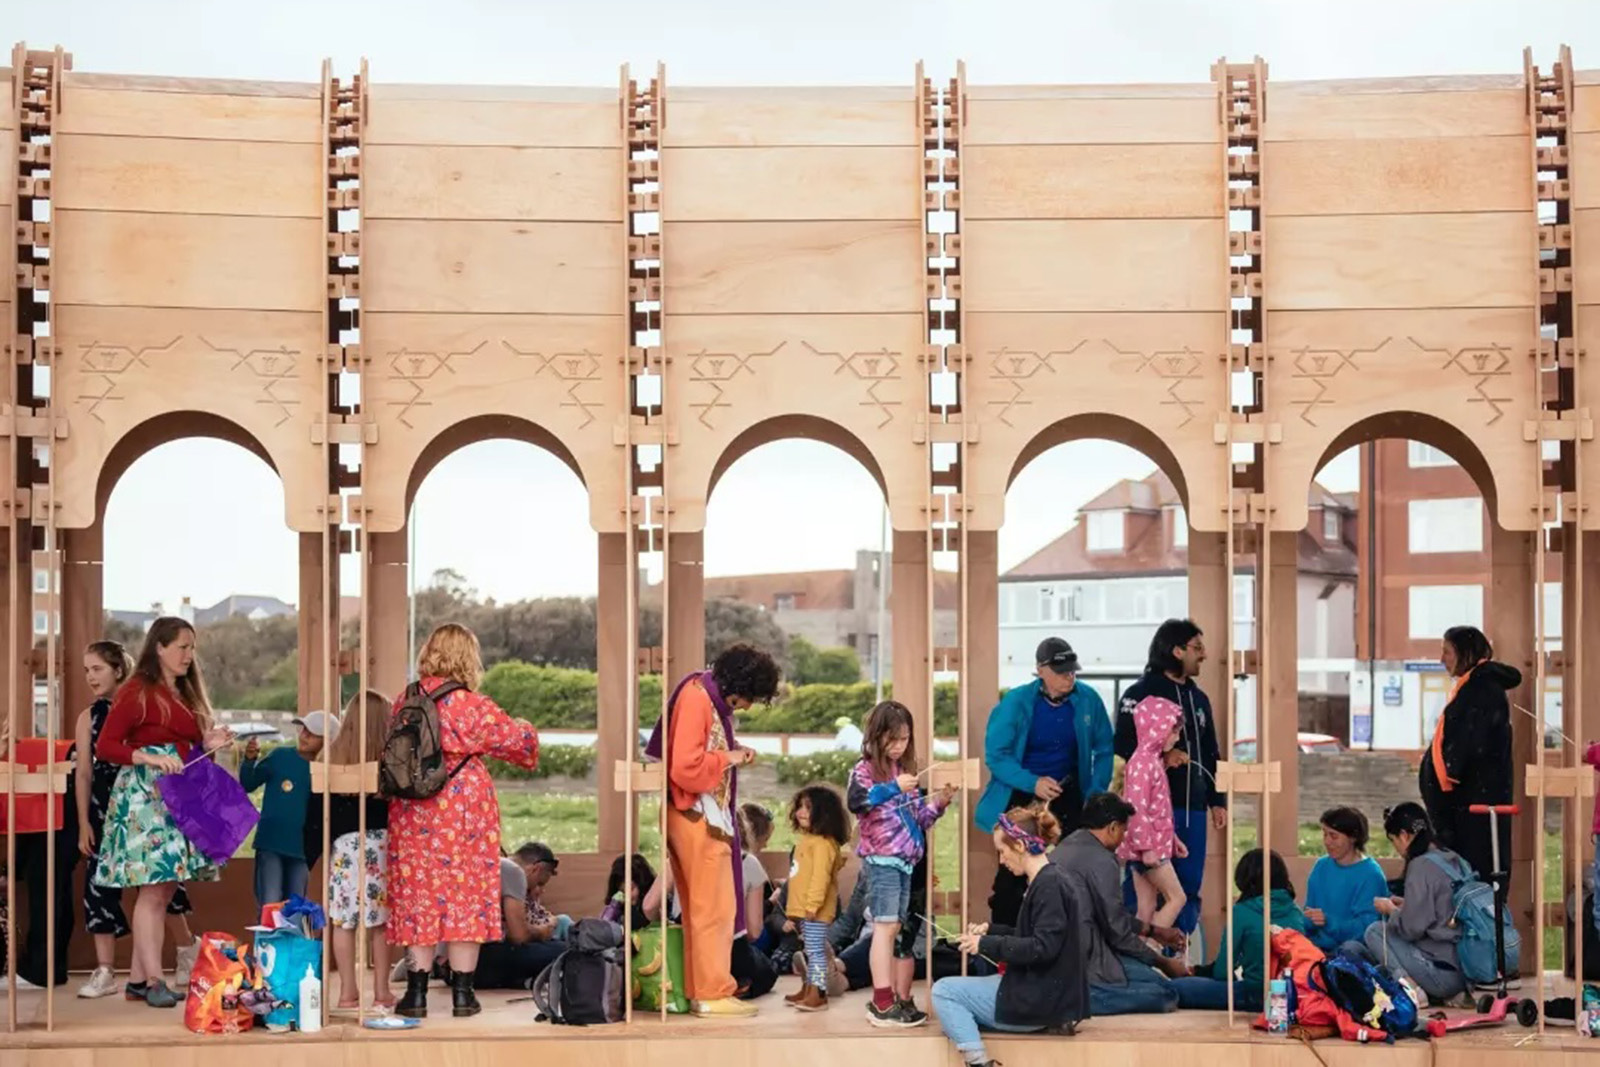 Families occupy an Arabic-style colonnade structure at the Brighton festival.